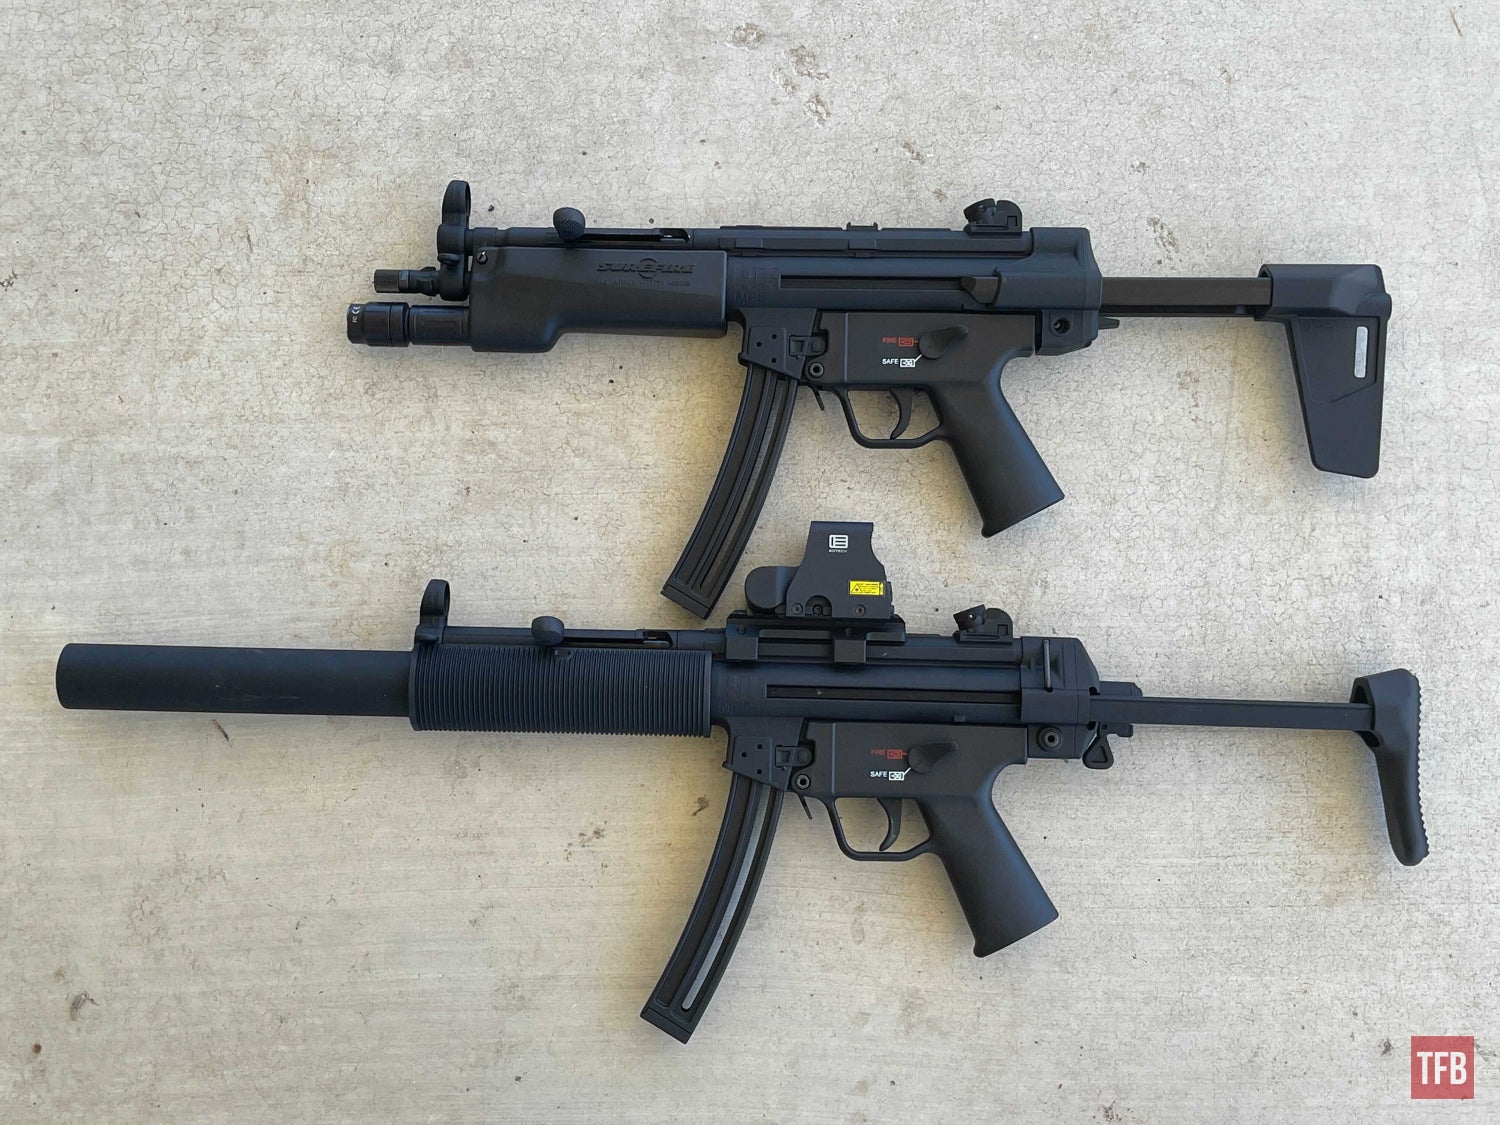 The Rimfire Report: Reviewing the H&K 22LR MP5 Pistol and Rifle